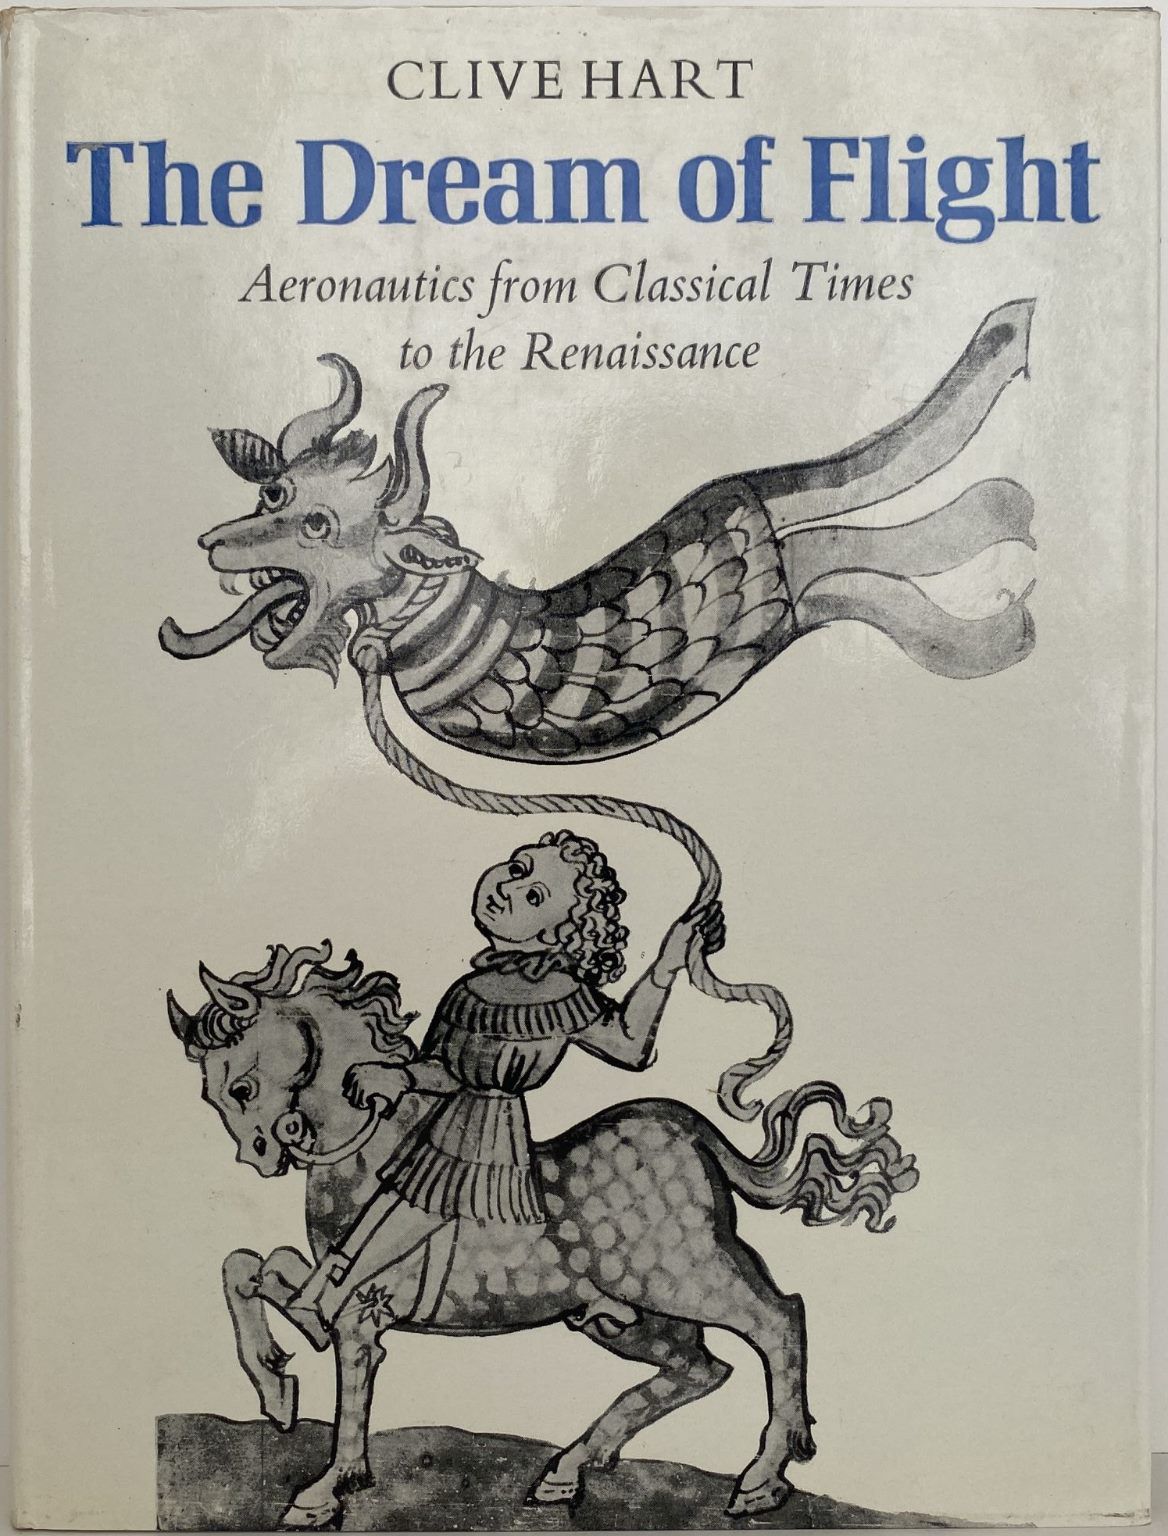 THE DREAM OF FLIGHT: Aeronautics from Classical Times to the Renaissance